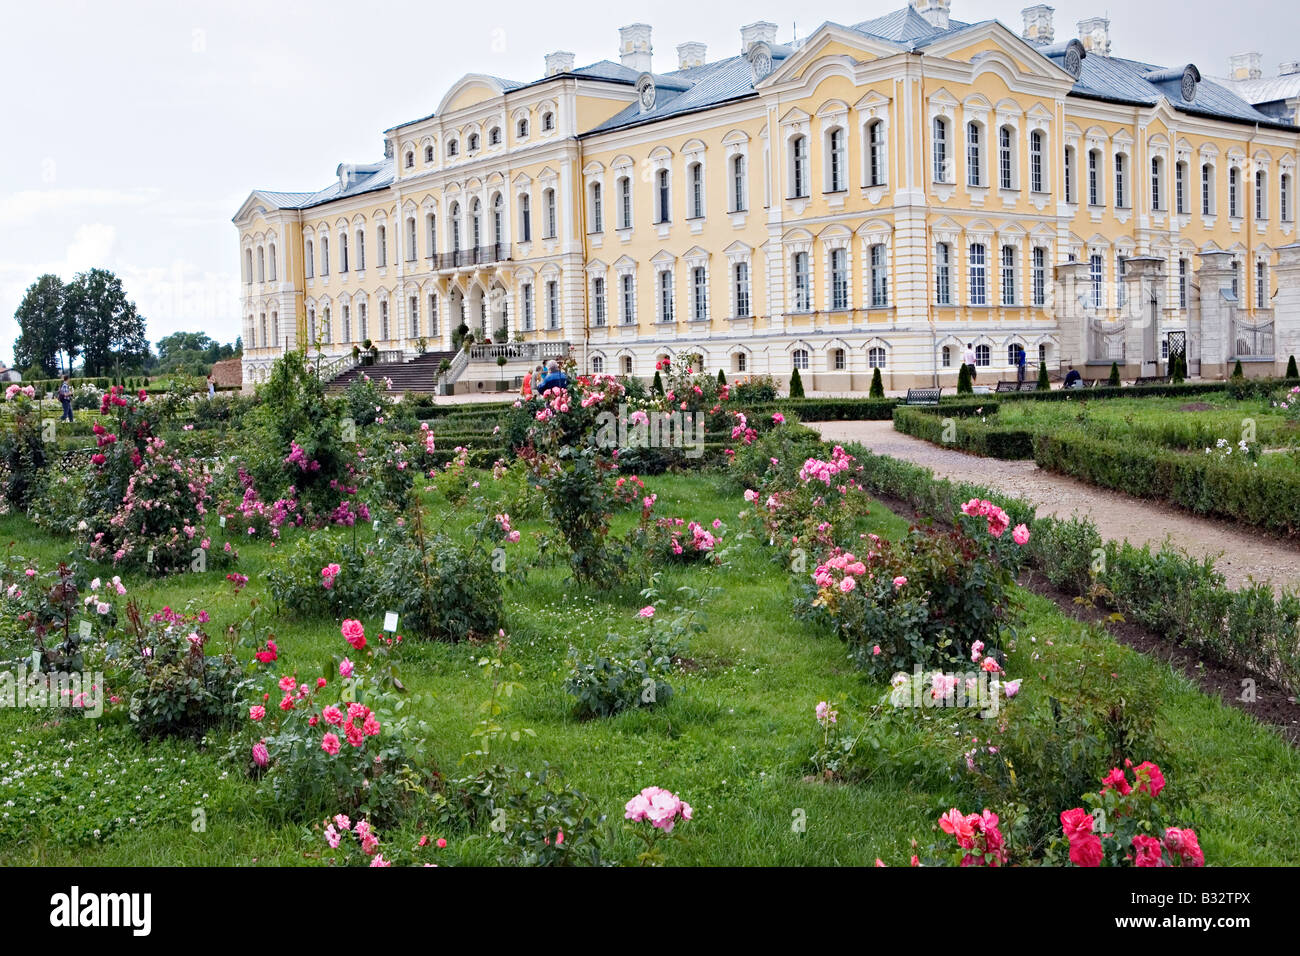 Rundale Palace garden in Lettonia Foto Stock